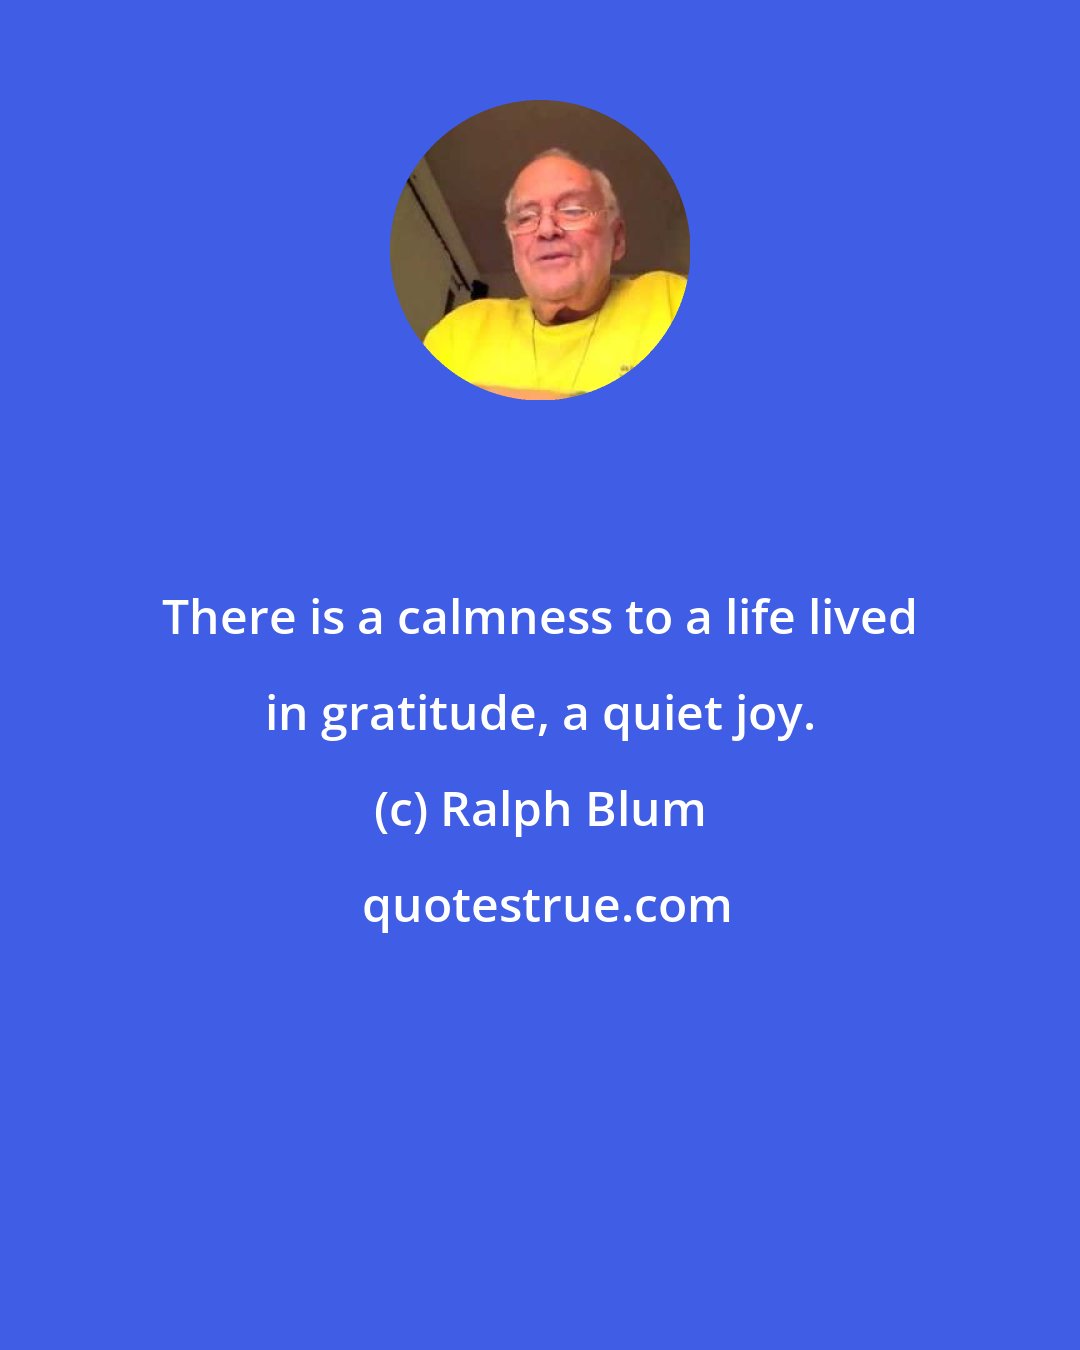 Ralph Blum: There is a calmness to a life lived in gratitude, a quiet joy.